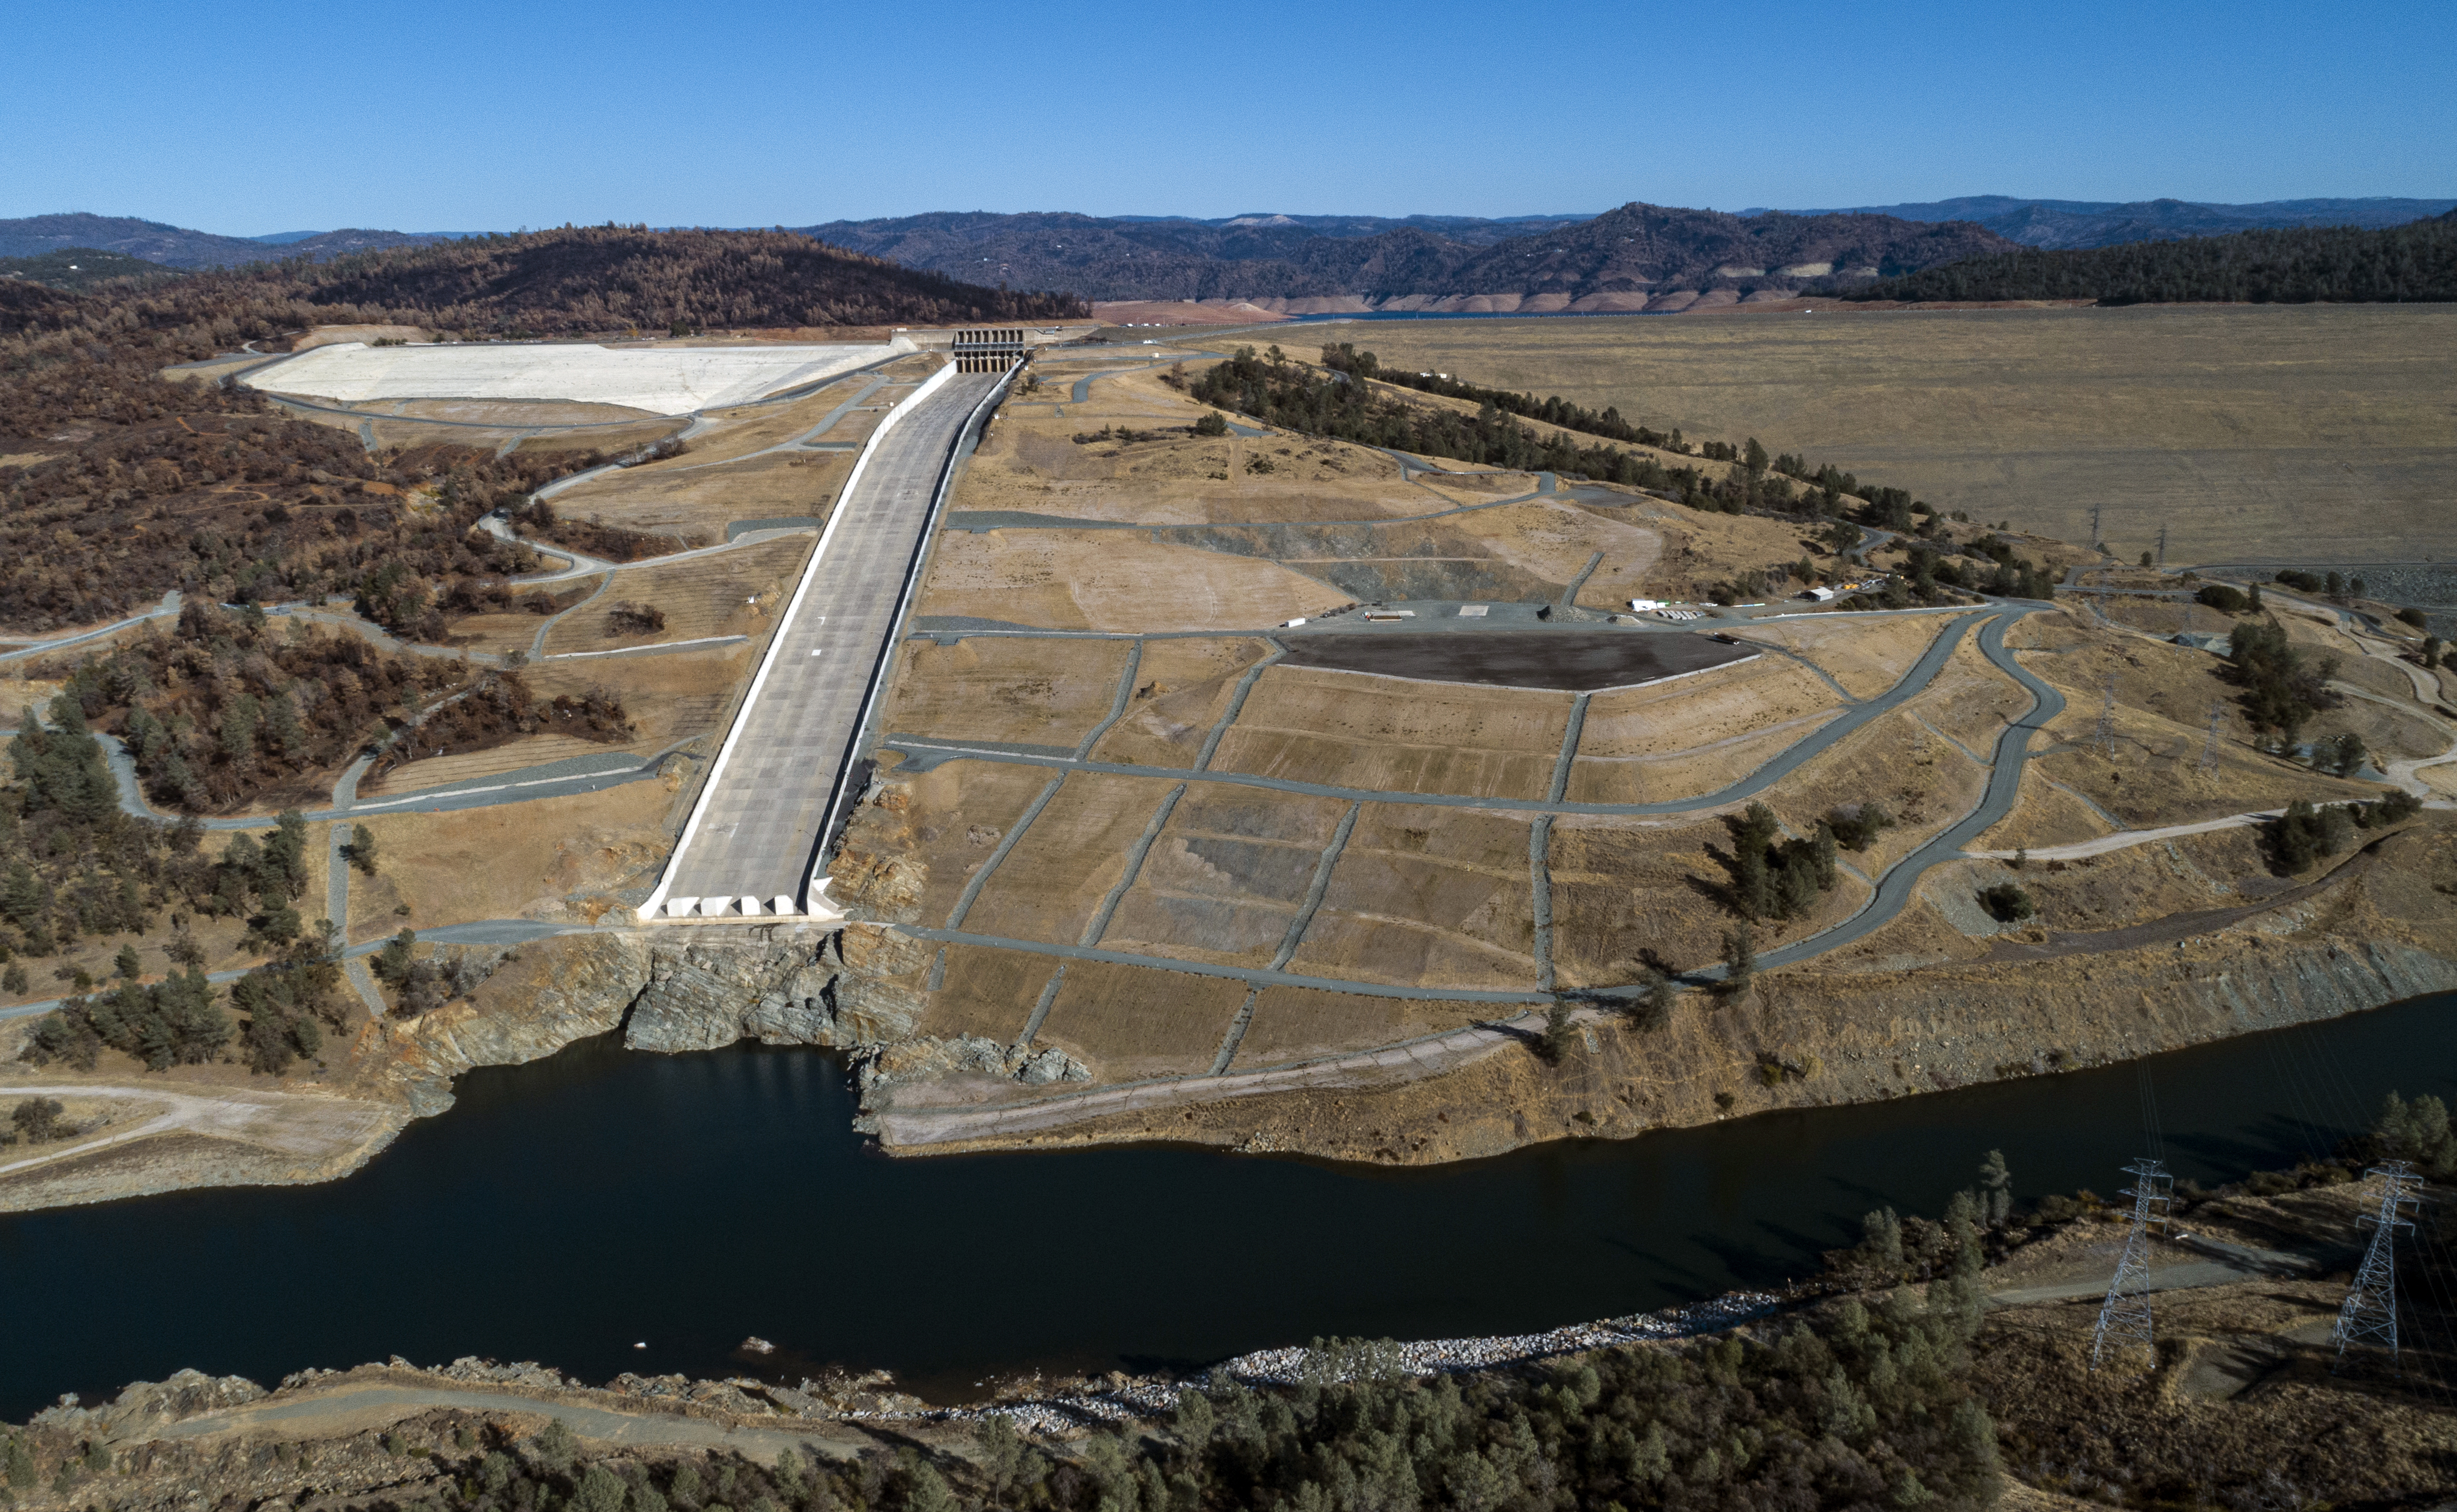 An aerial view of the Oroville Main Spillway and the Lake Oroville Emergency Spillway in Butte County, California